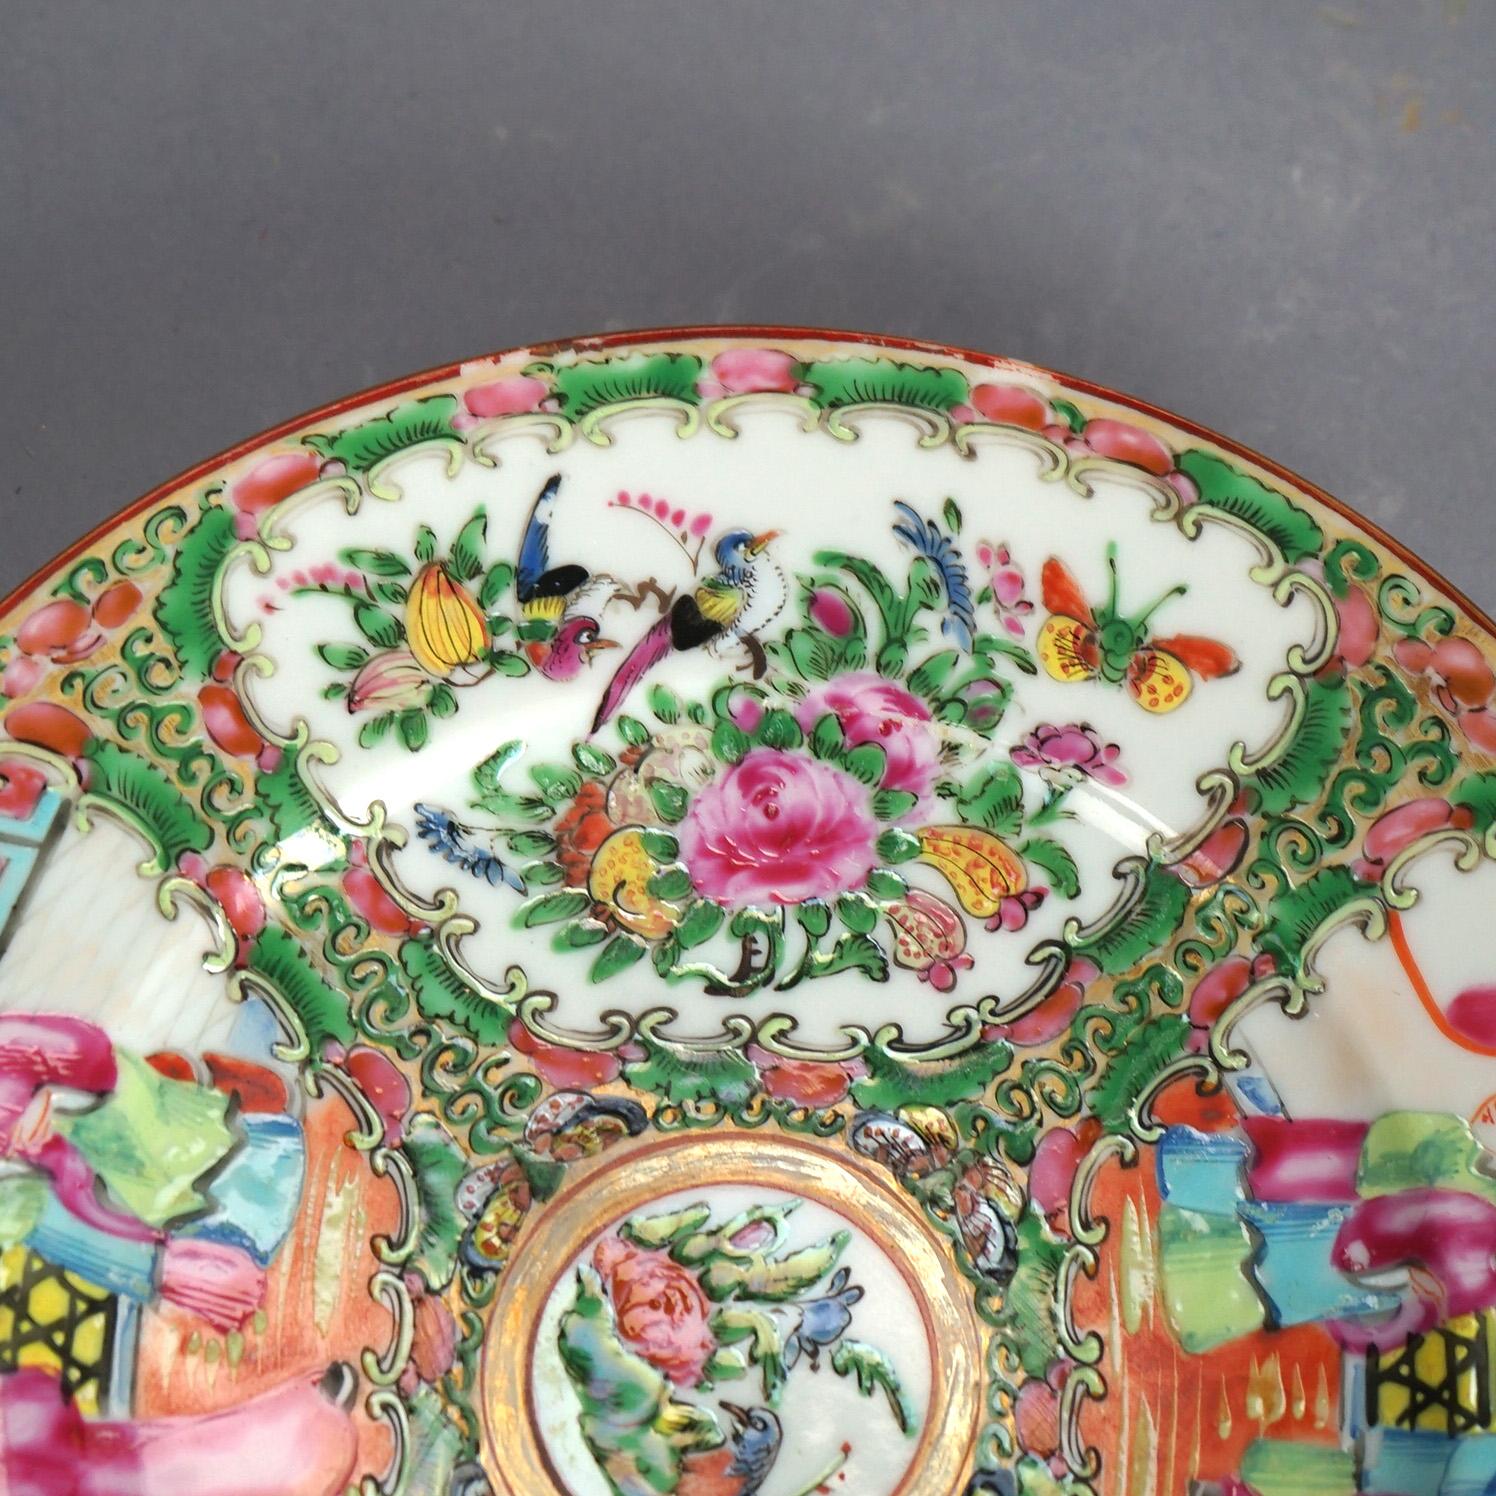 Gilt Antique Chinese Rose Medallion Porcelain Plates with Gardens & Figures C1900 For Sale